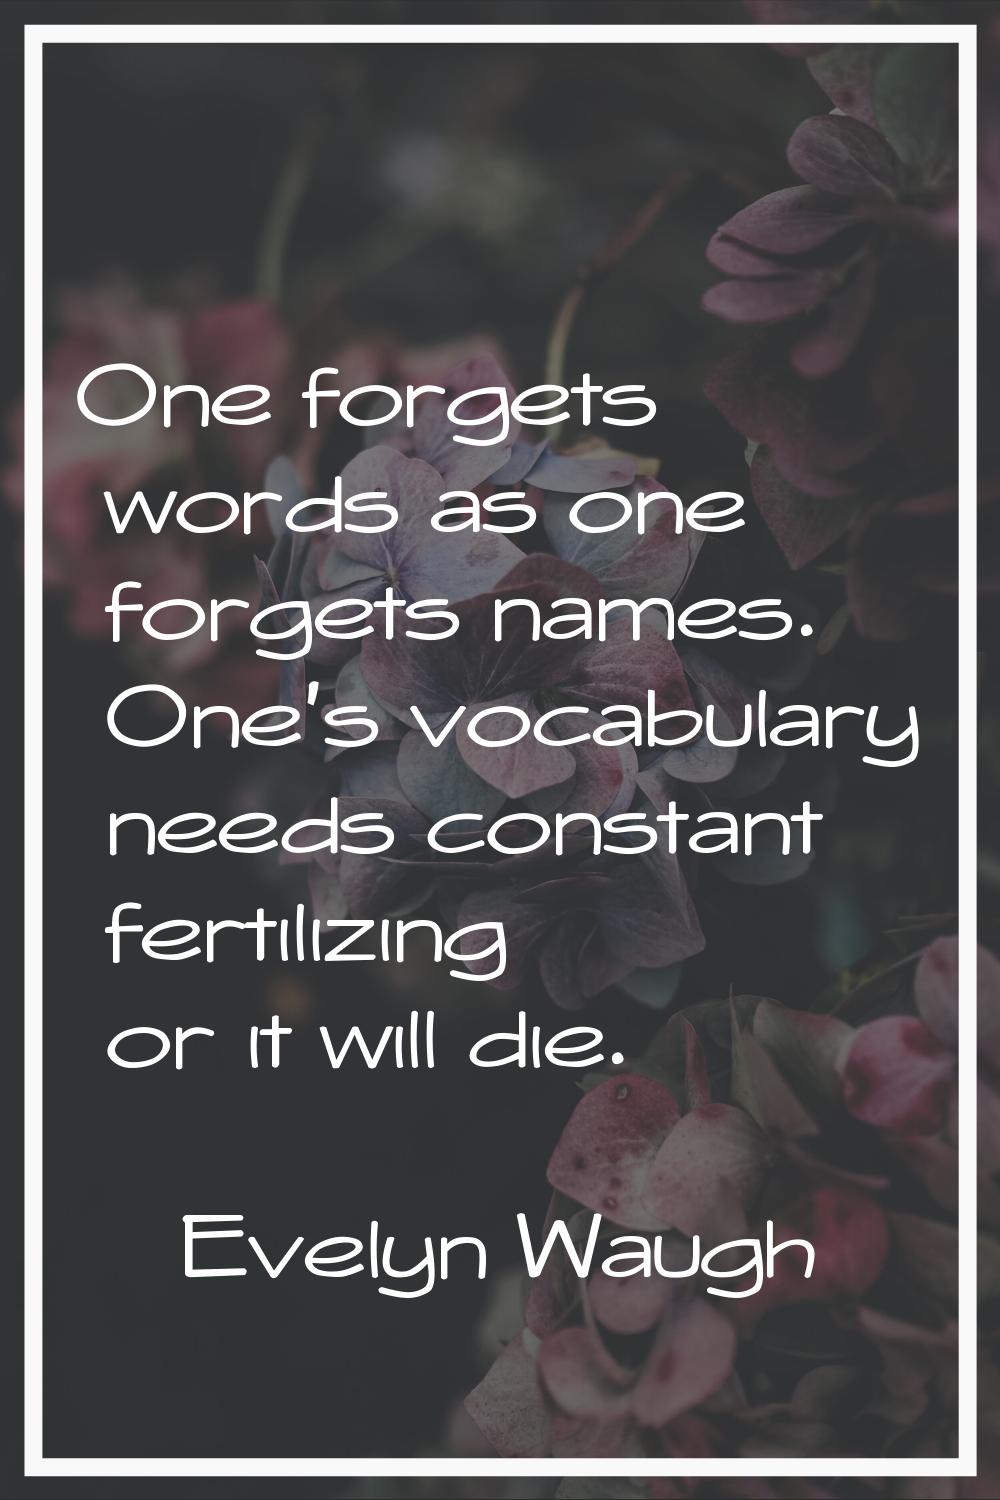 One forgets words as one forgets names. One's vocabulary needs constant fertilizing or it will die.